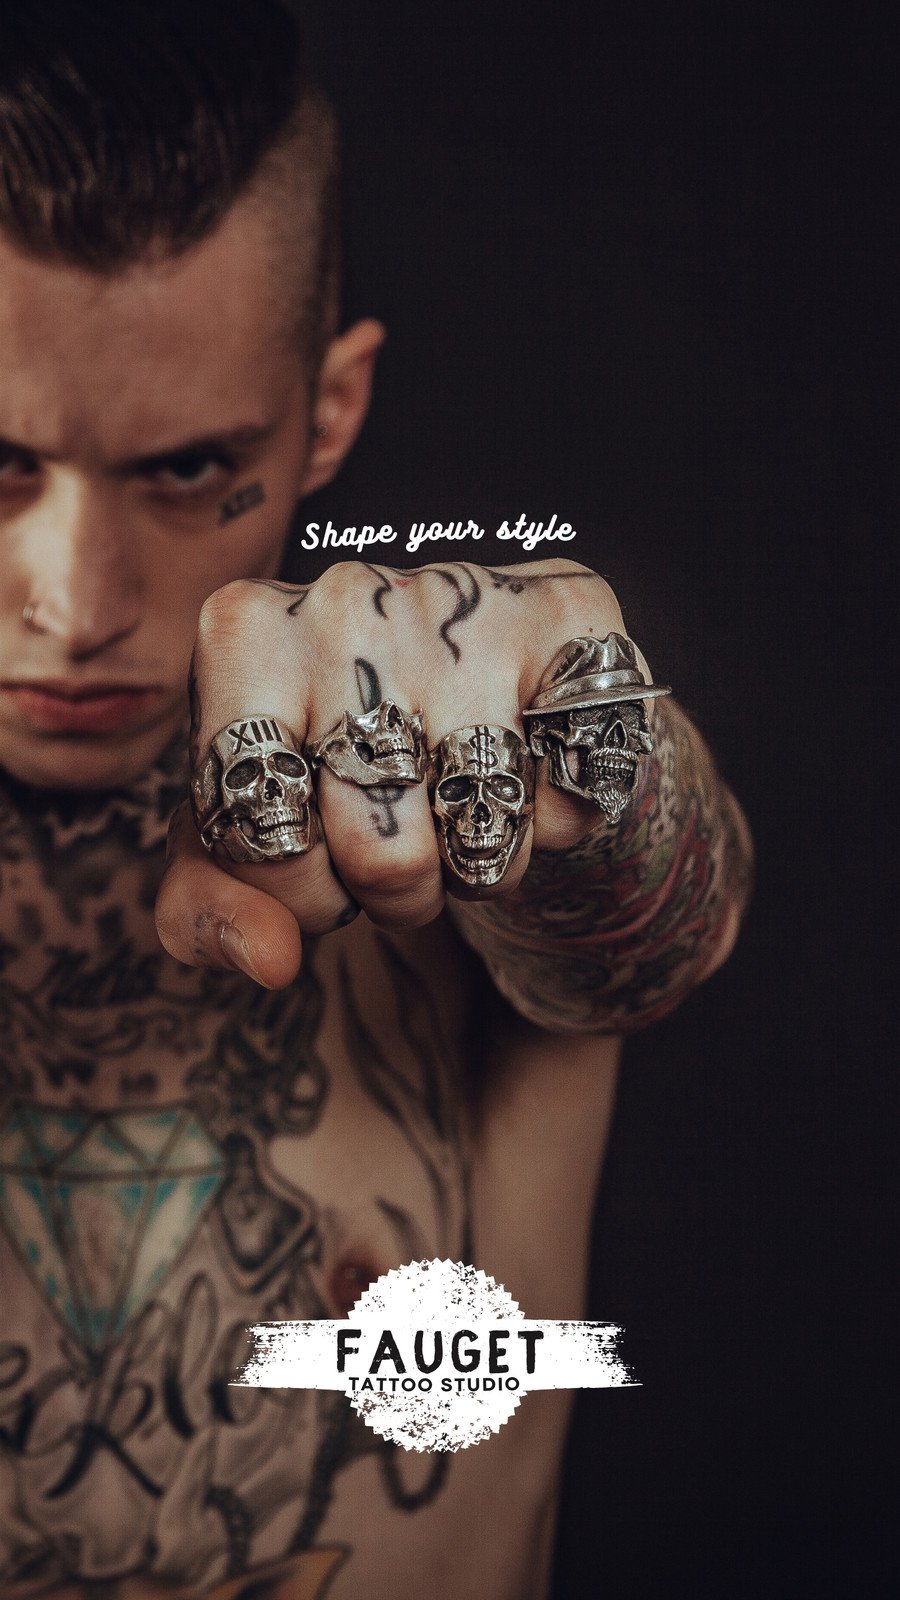 The Epic List of Best Tattoo Designs and Ideas for Men